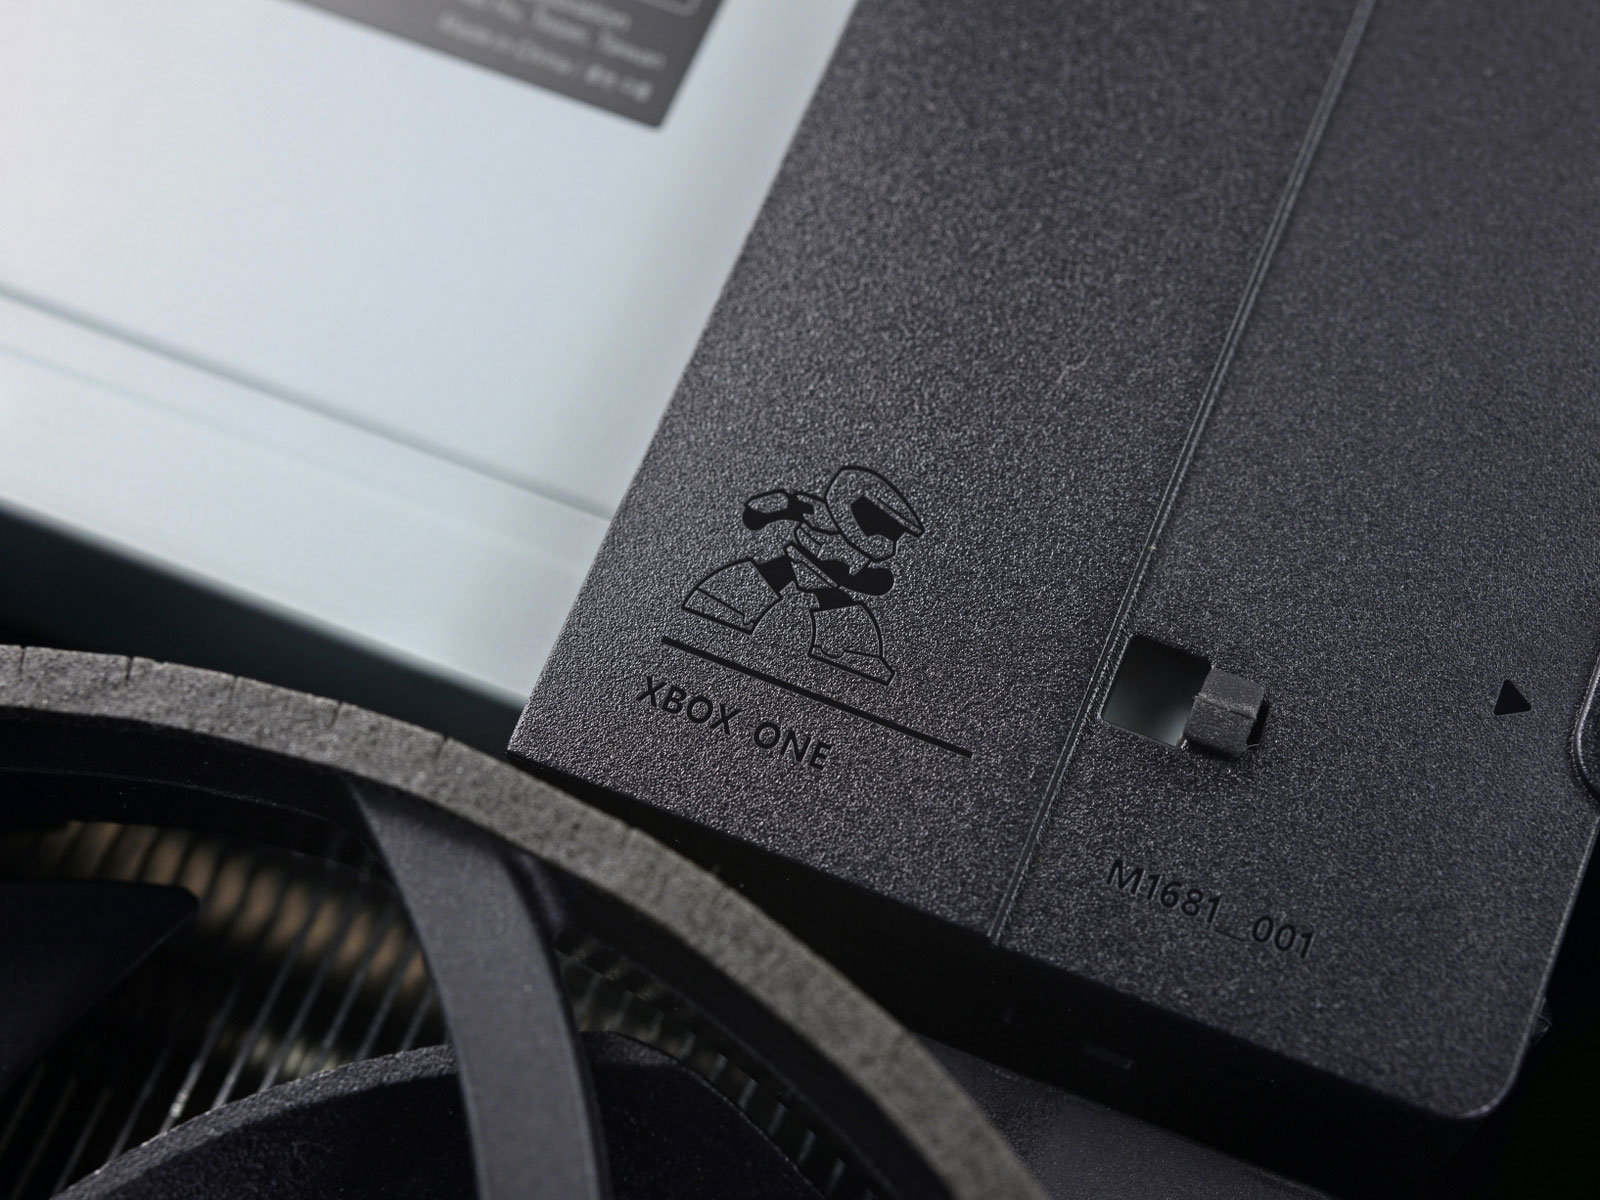 Every Xbox One S Has A Tiny Master Chief Inside